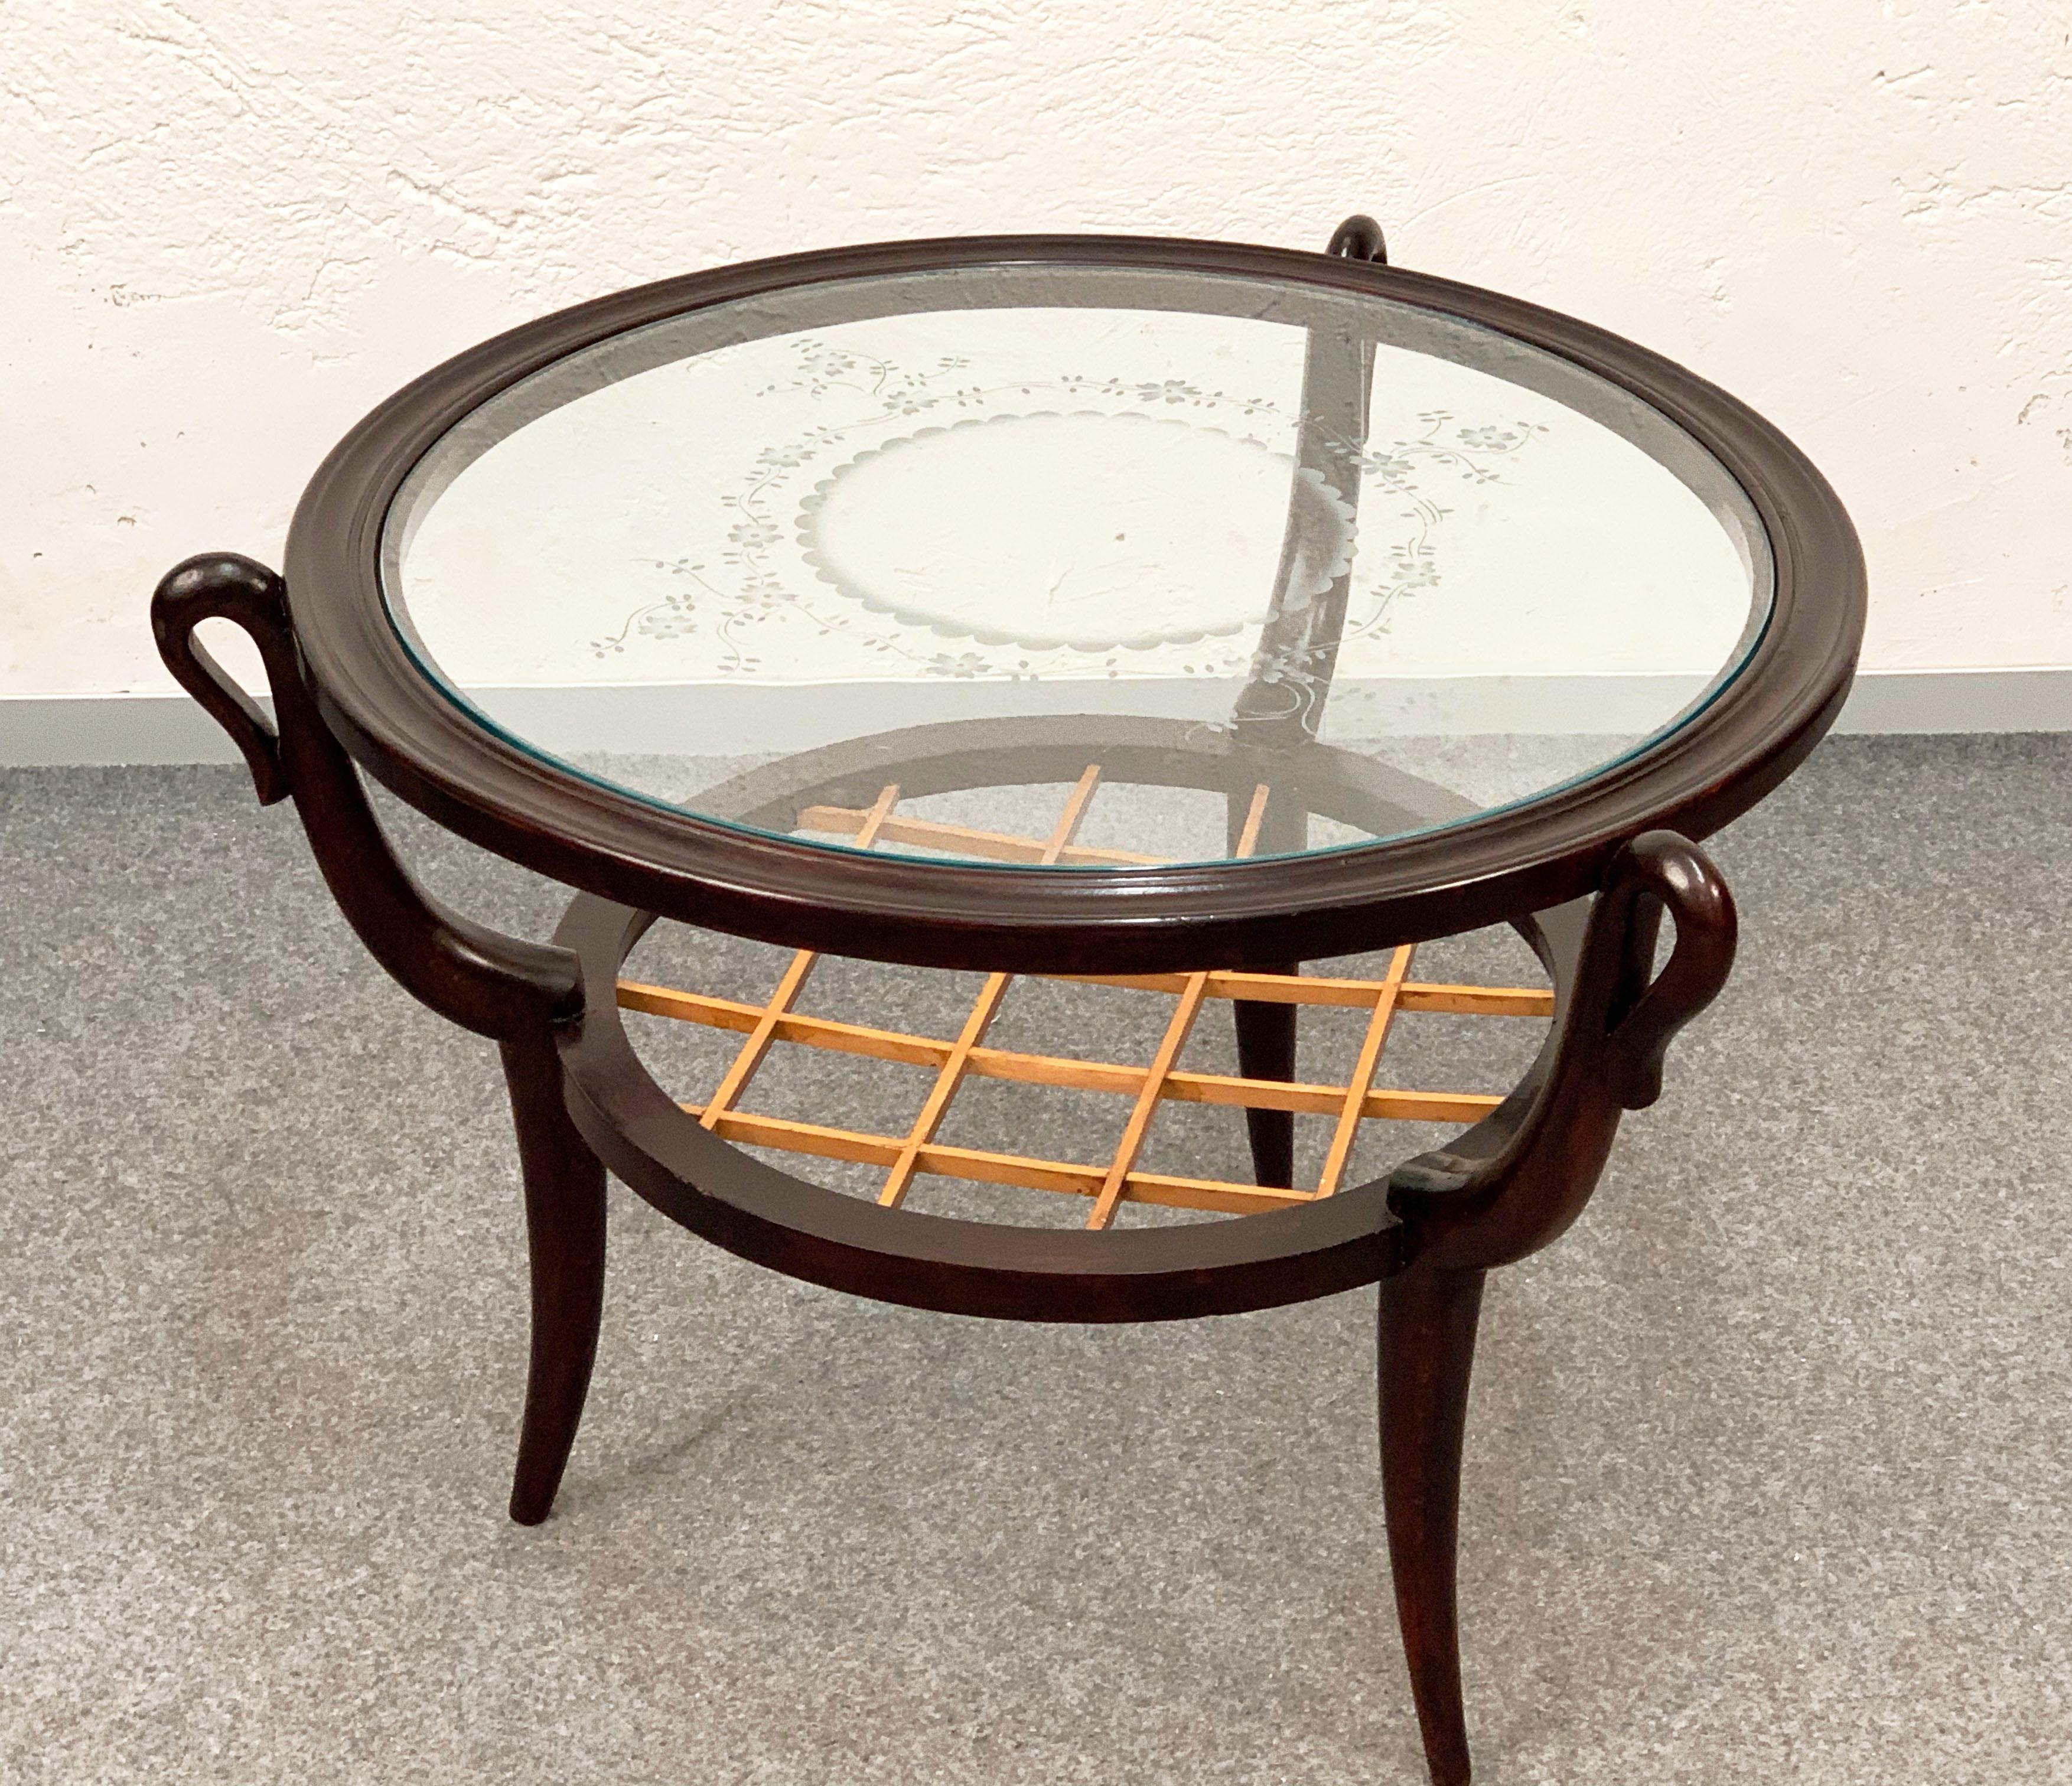 Mid-Century Modern Two-level Round Wood and Glass Italian Coffee Table Gio Ponti Style, 1950s For Sale